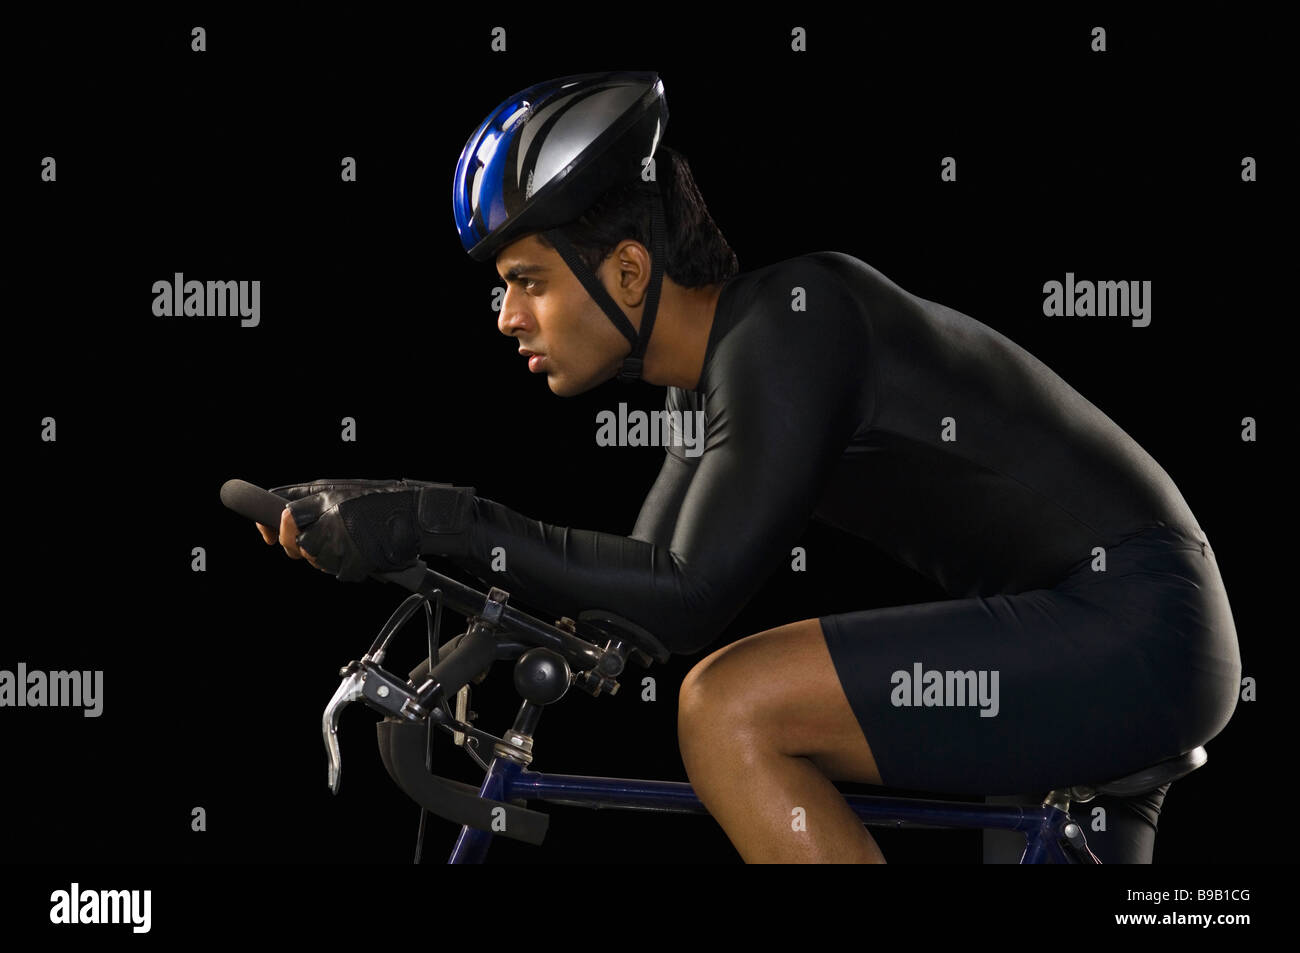 Male cyclist riding a racing bicycle Stock Photo